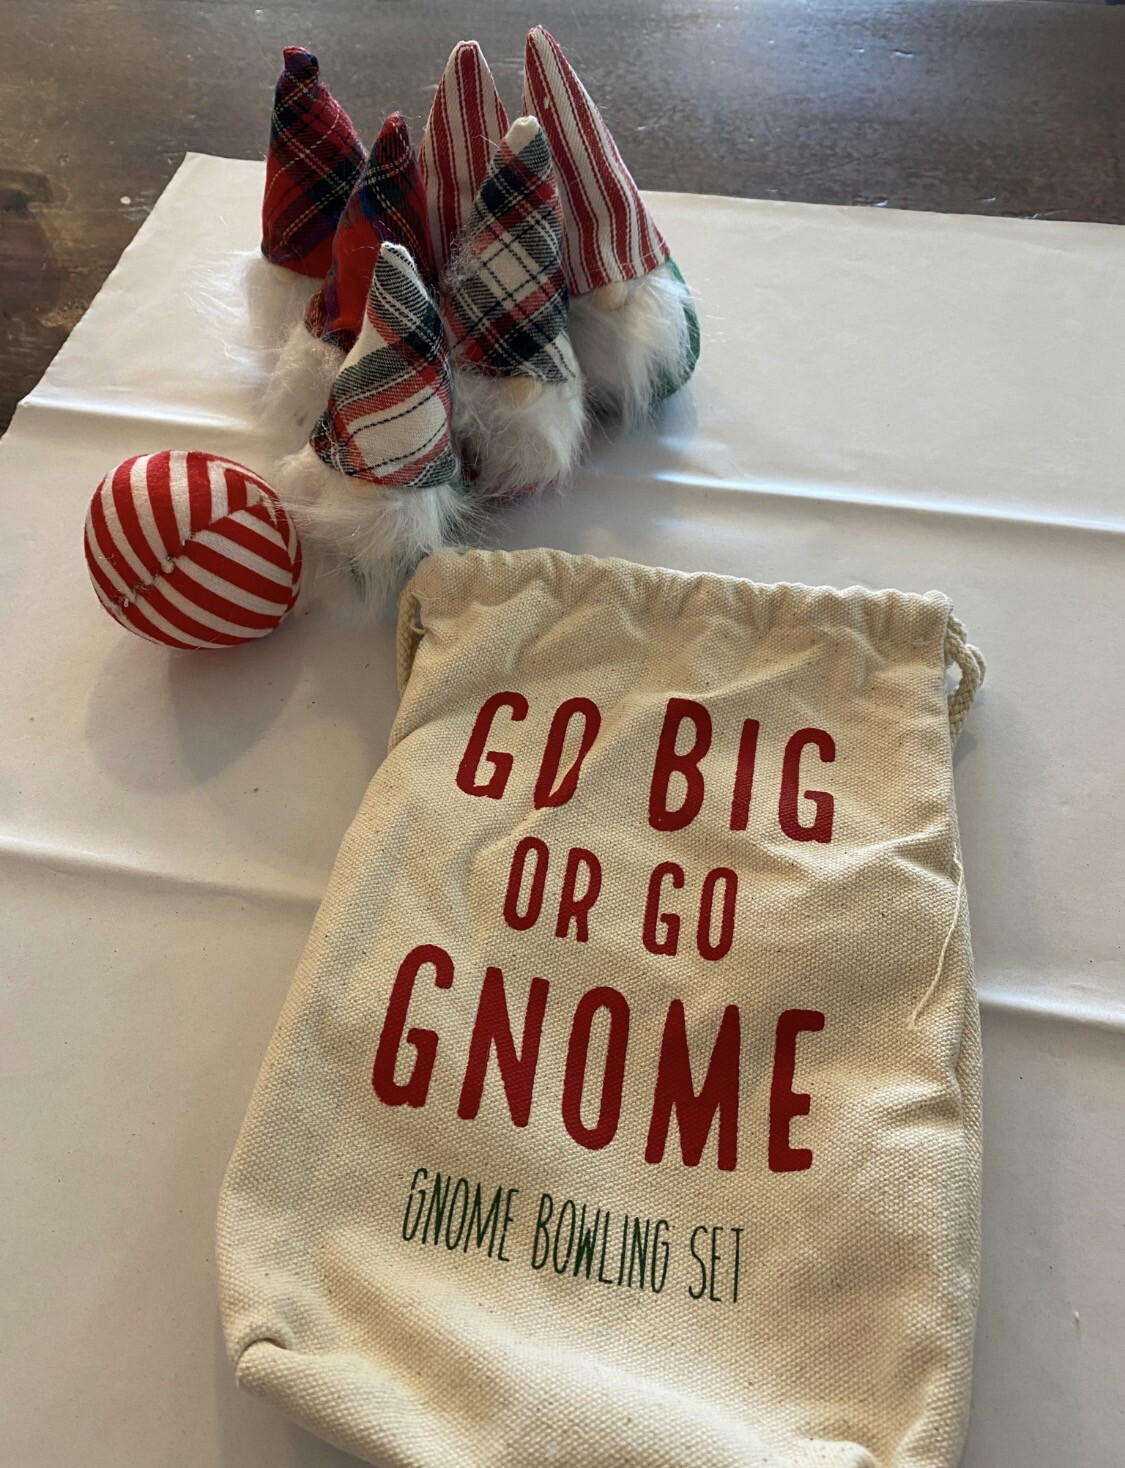 Gnome Bowling Game